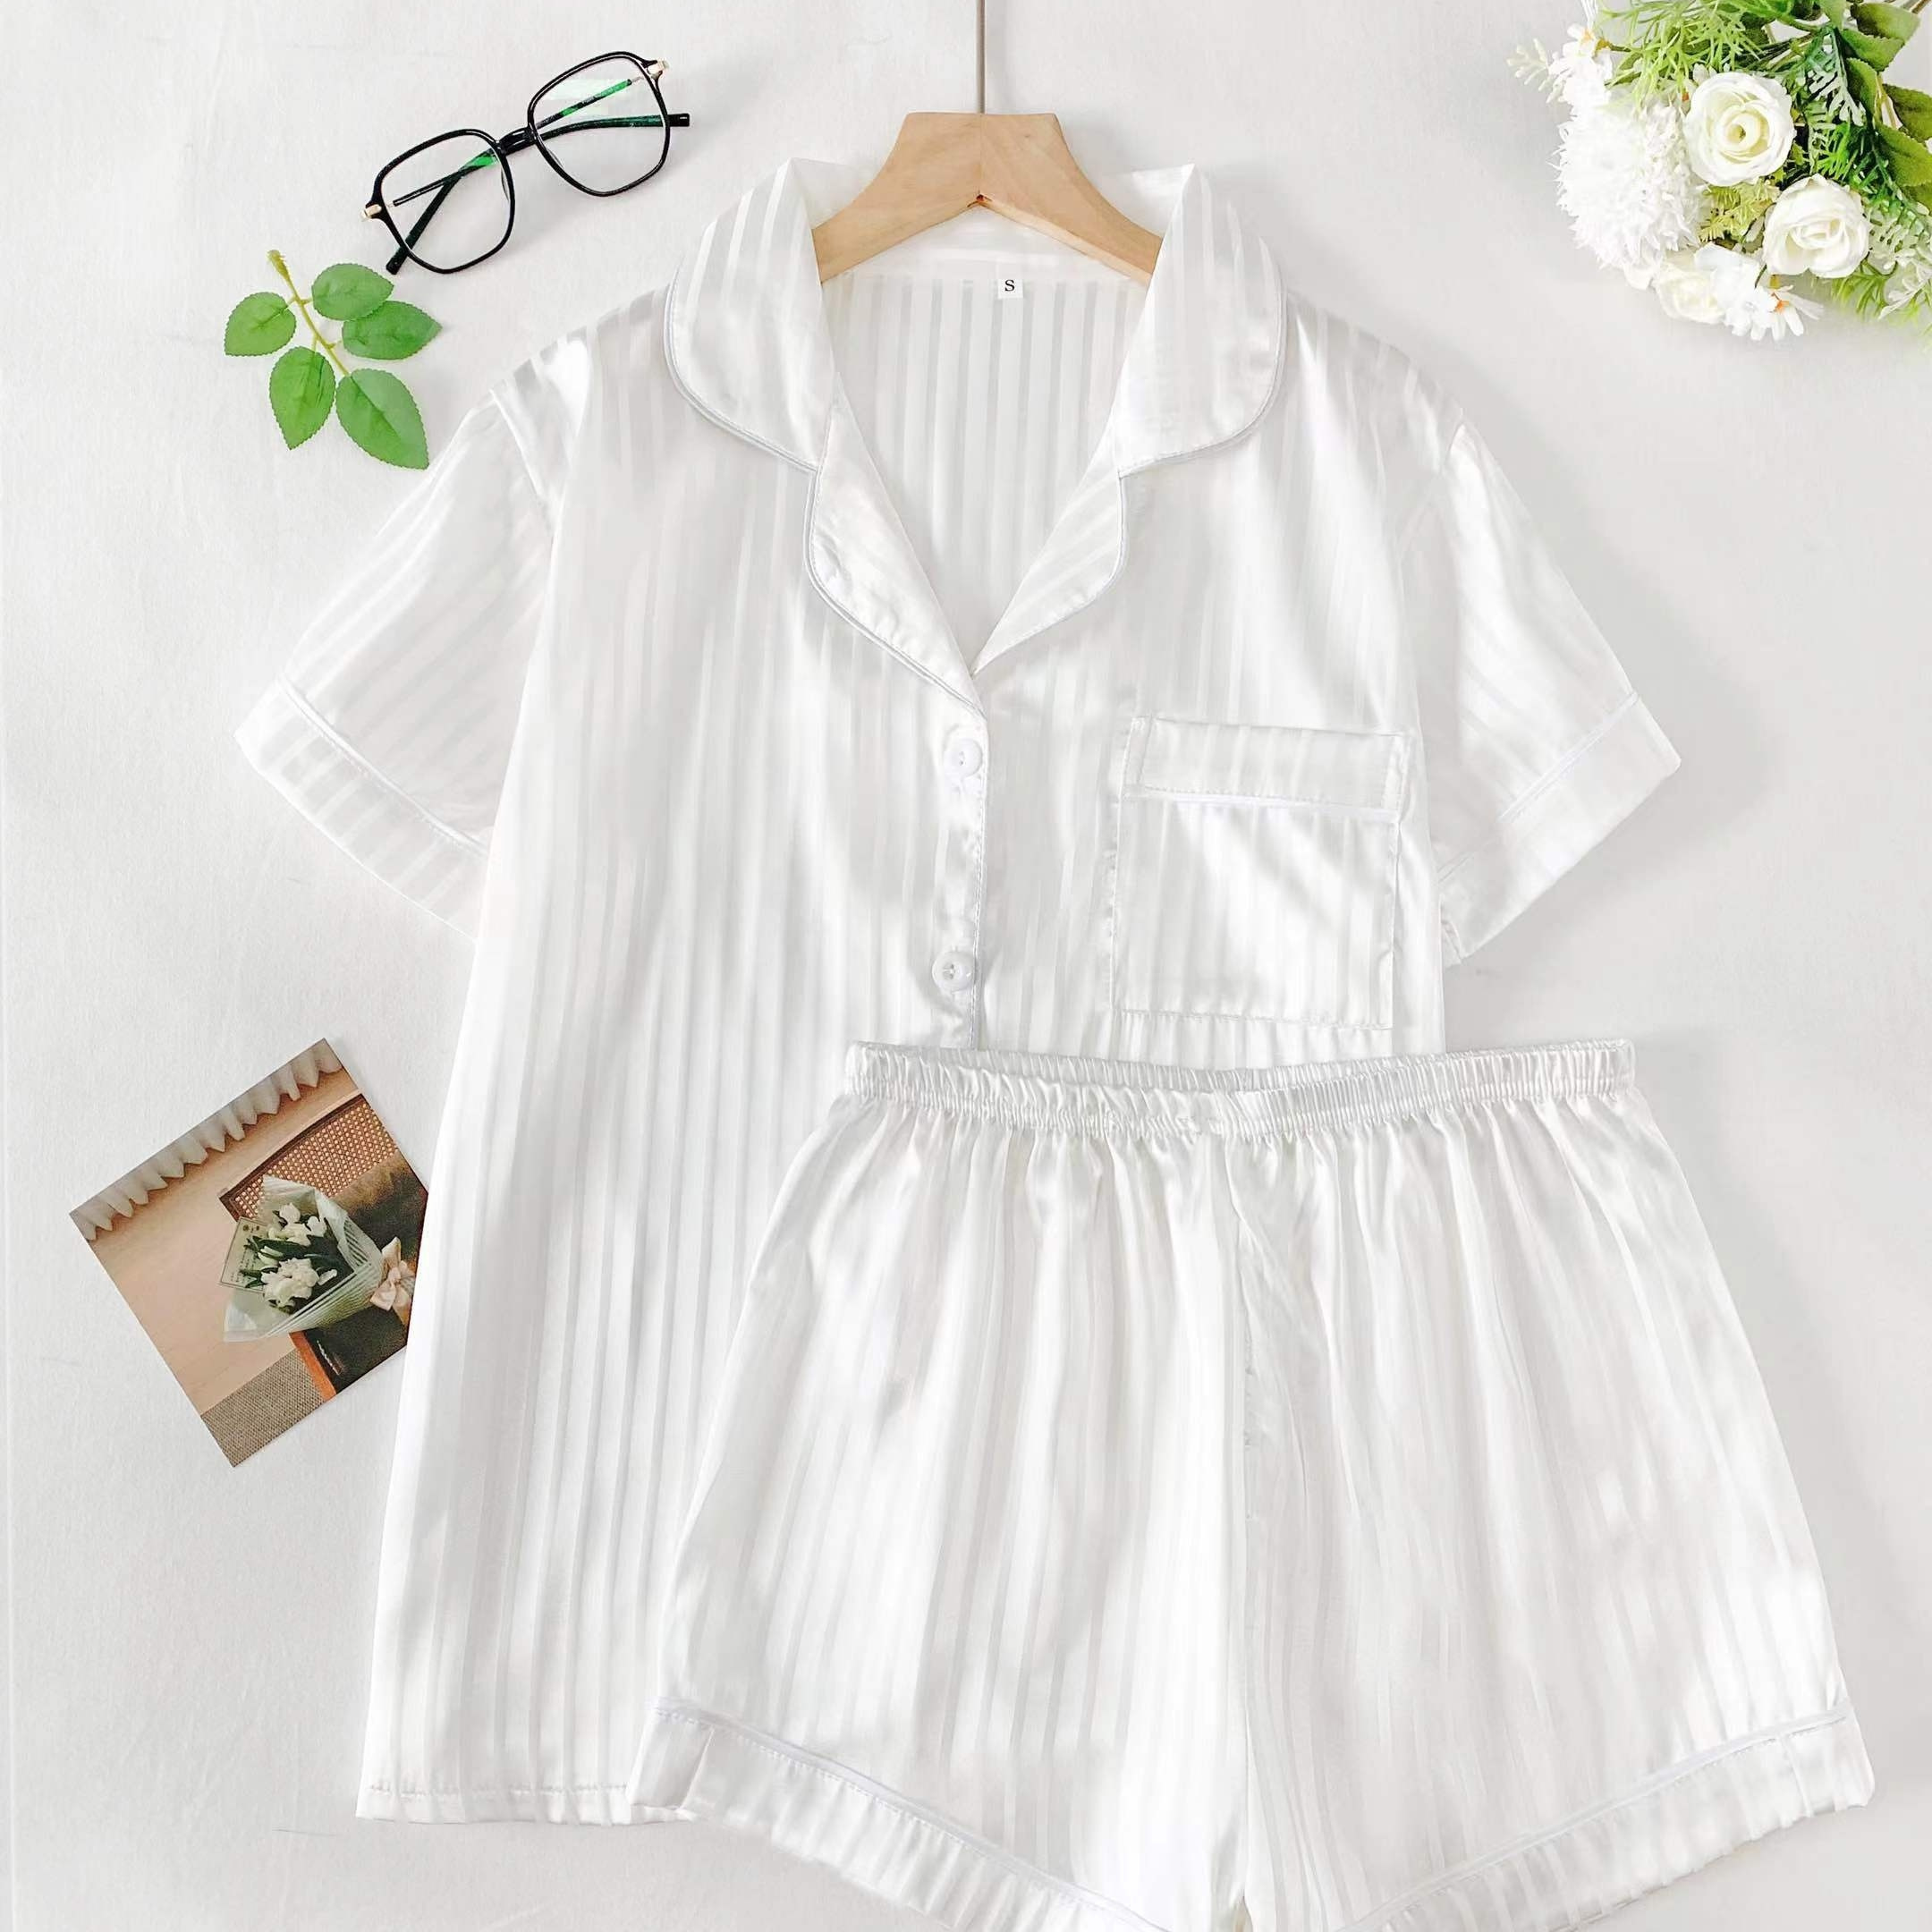 

Women's Striped Satin Casual Pajama Set, Short Sleeve Buttons Lapel Top & Shorts, Comfortable Relaxed Fit, Summer Nightwear